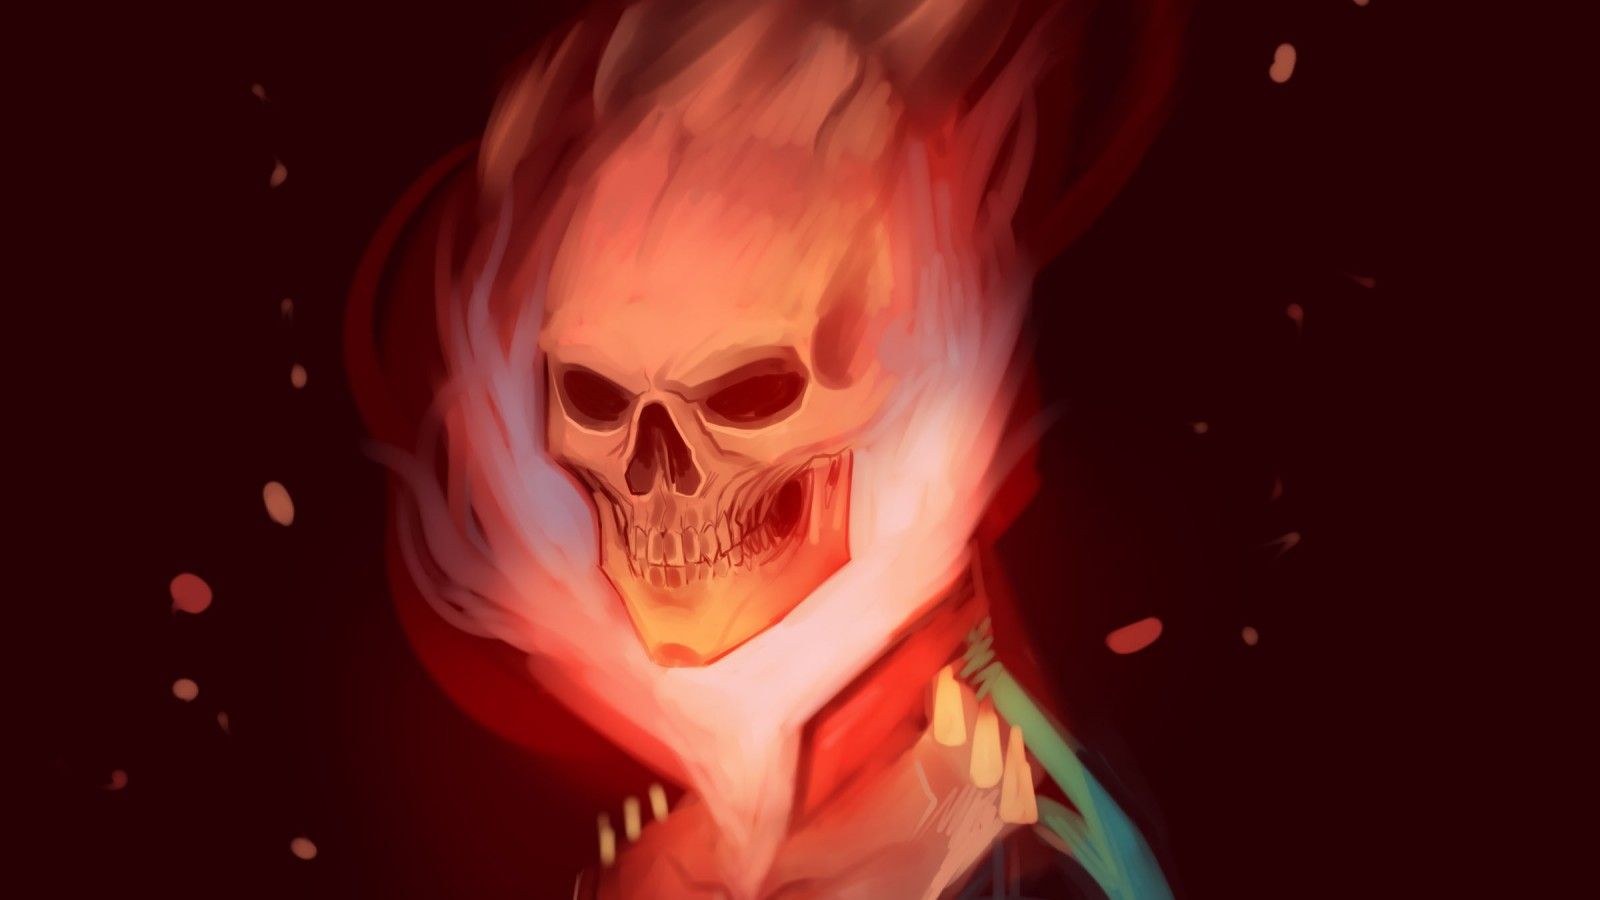 Ghost Rider Digital Art 1600x900 Hot Desktop and background for your PC and mobile